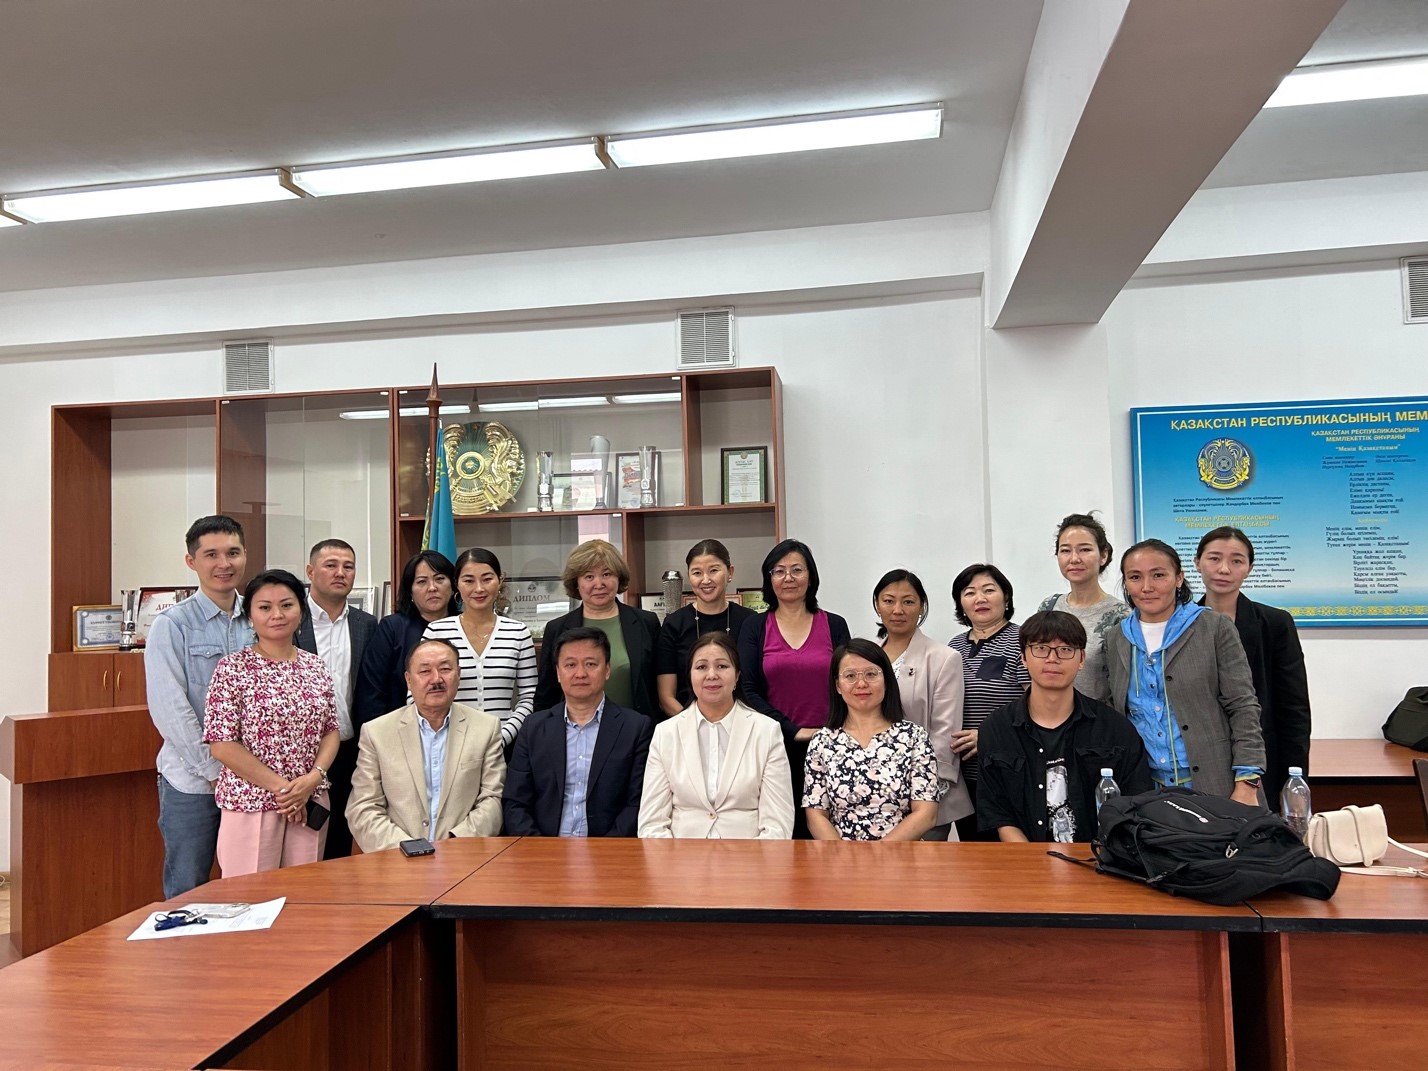 AID TO THE STRENGTHENING OF THE CHINESE-KAZAKHSTAN COOPERATION OF THE FACULTY OF BIOLOGY AND BIOTECHNOLOGY